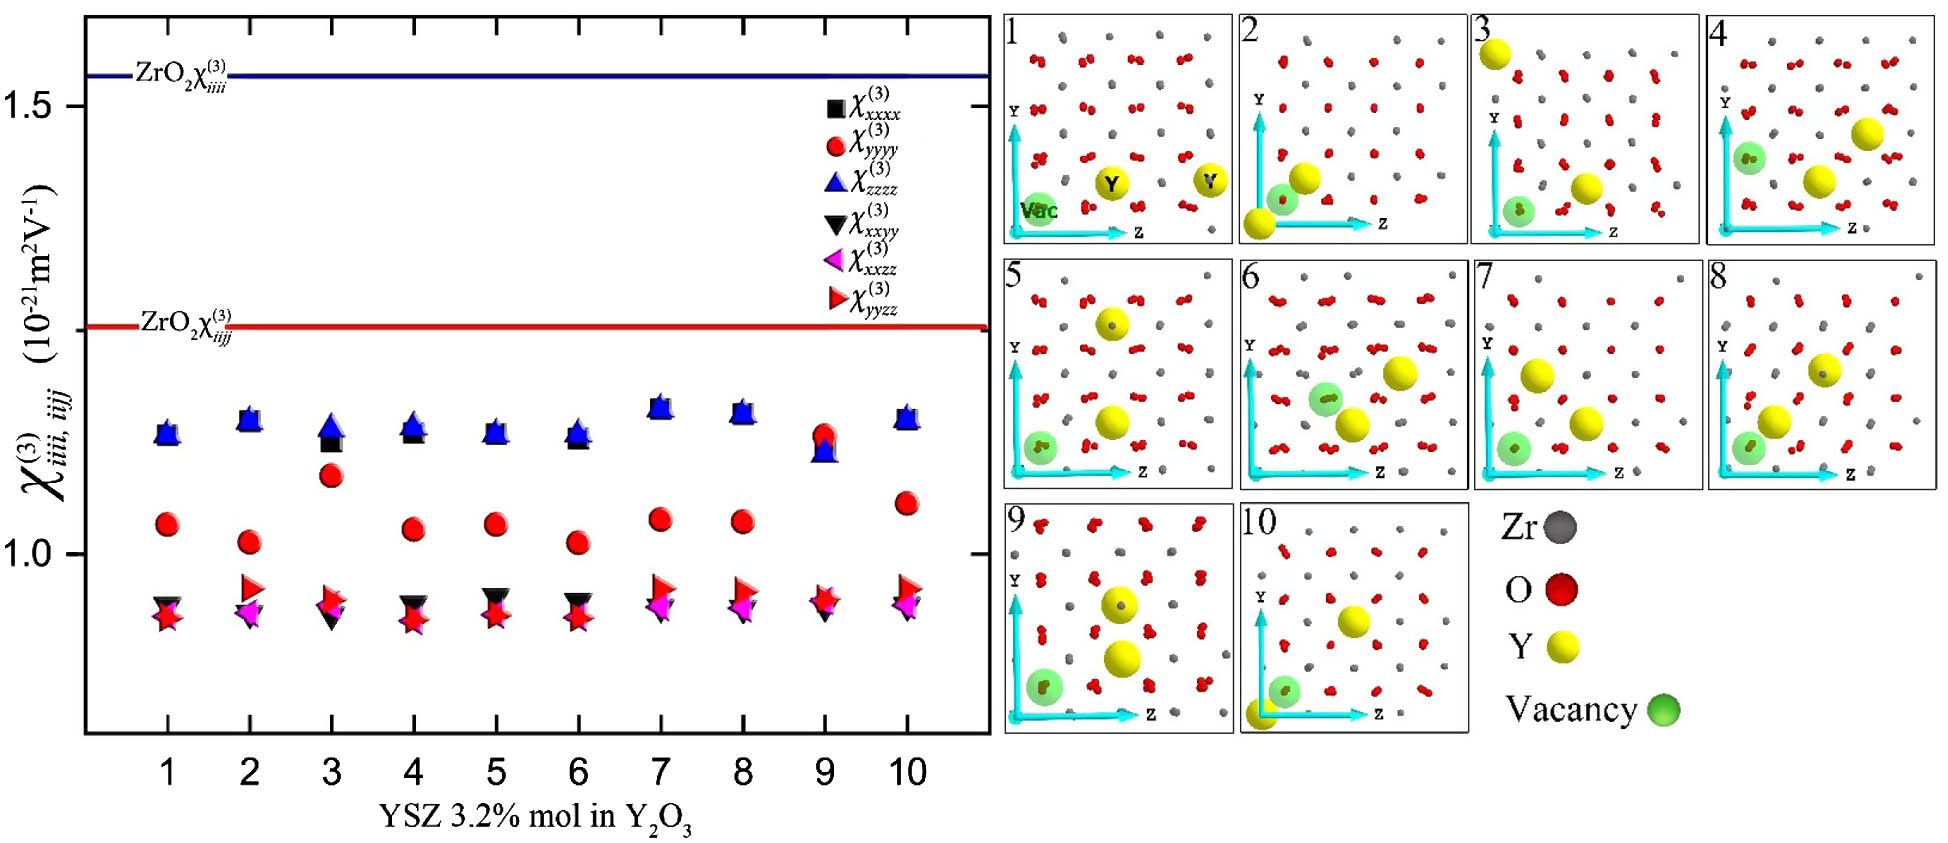 Variation of the third-order susceptibility tensorial components (χiiii,iijj) of YSZ 3.2% in Y2O3 as a function of the relative position between Y dopants (yellow spheres) and O vacancies (green spheres). The unit cells [25] of each configuration considered, representing symmetry in equivalent vacancy/dopant distributions, are schematically given at the right. Solid lines represent the corresponding susceptibility components of c-ZrO2. All values have been computed at the PBE0 level of theory.